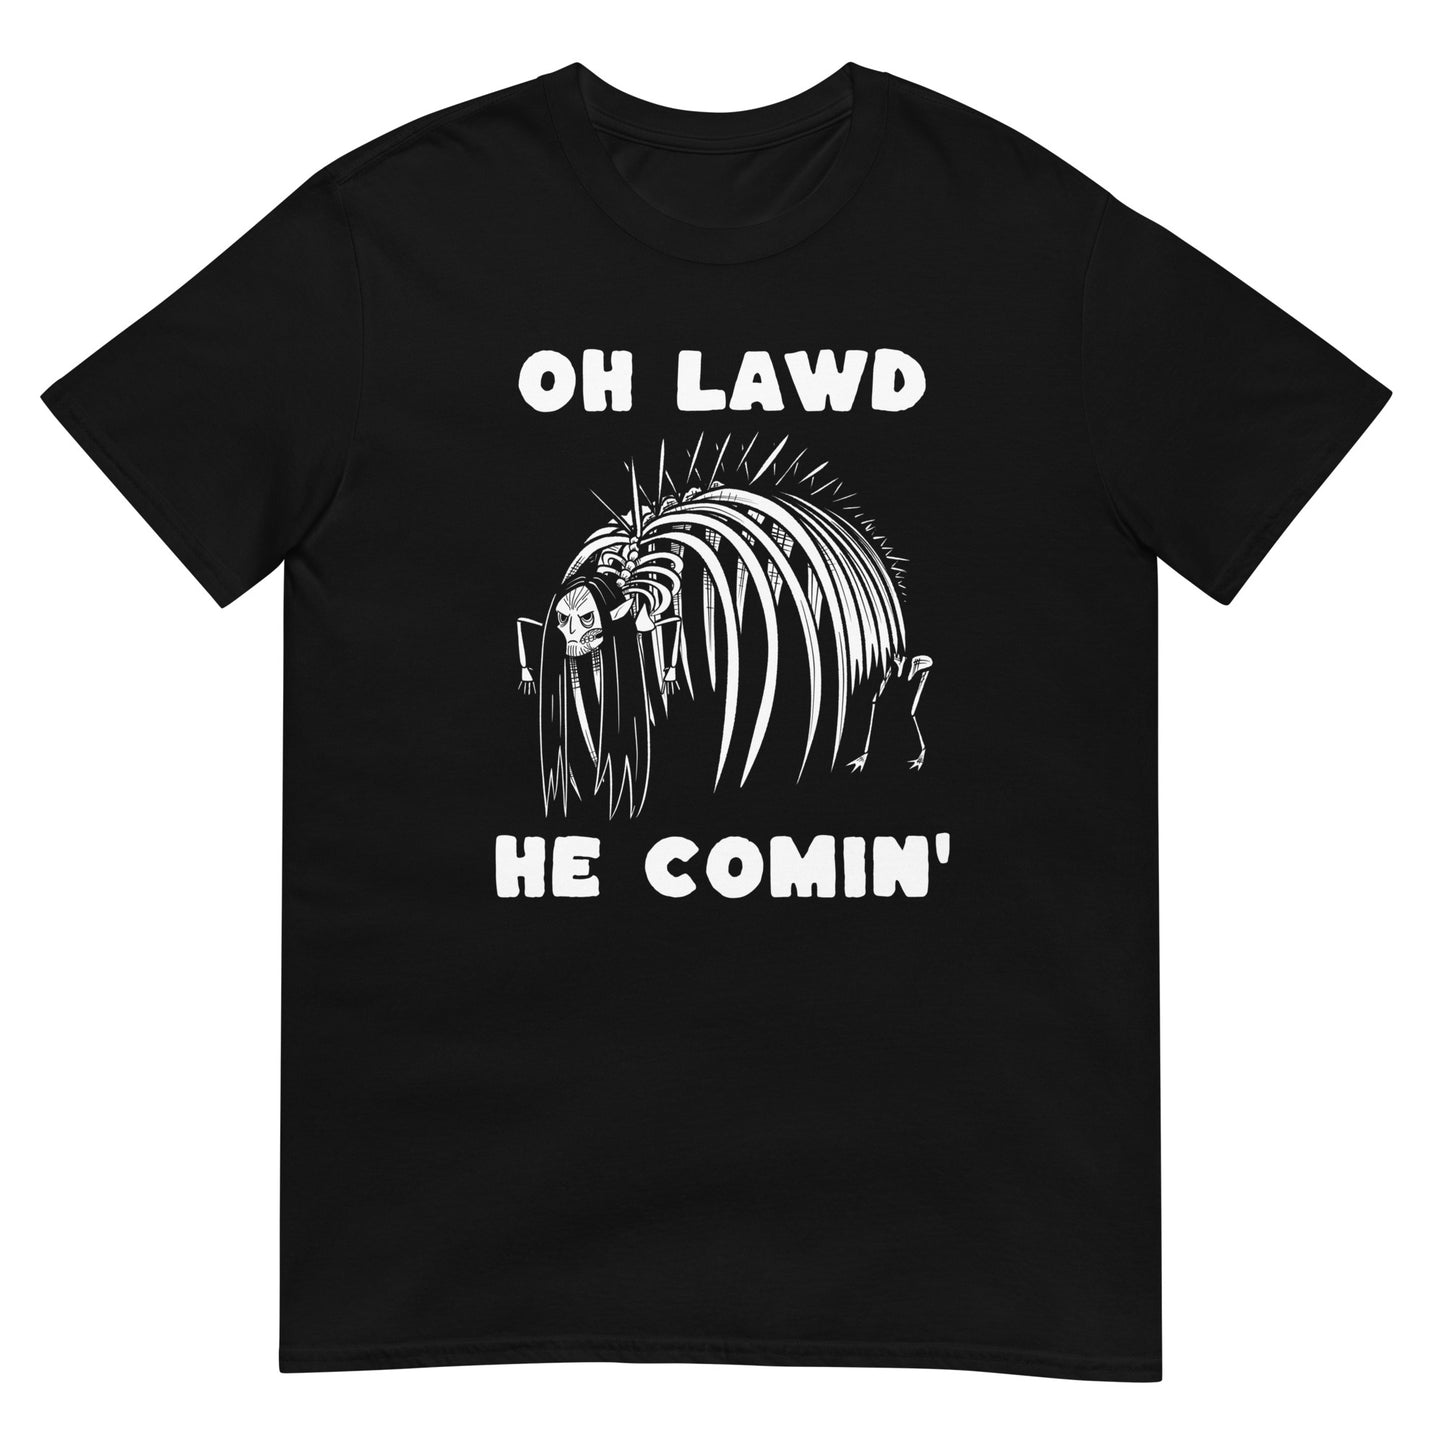 Oh Lawd He Comin! - Eren Yeager AoT T-Shirt